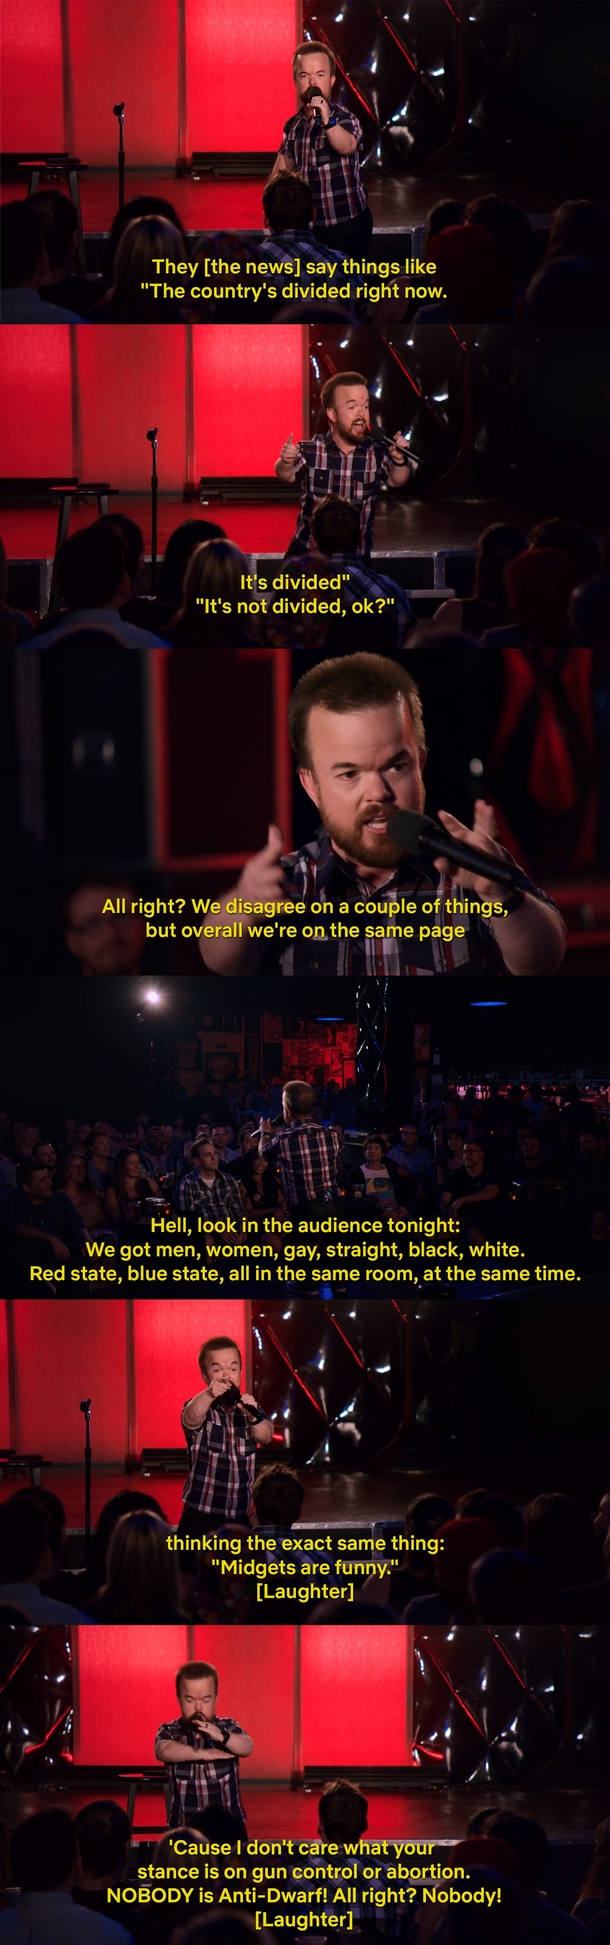 Brad Williams uniting this country one joke at a time